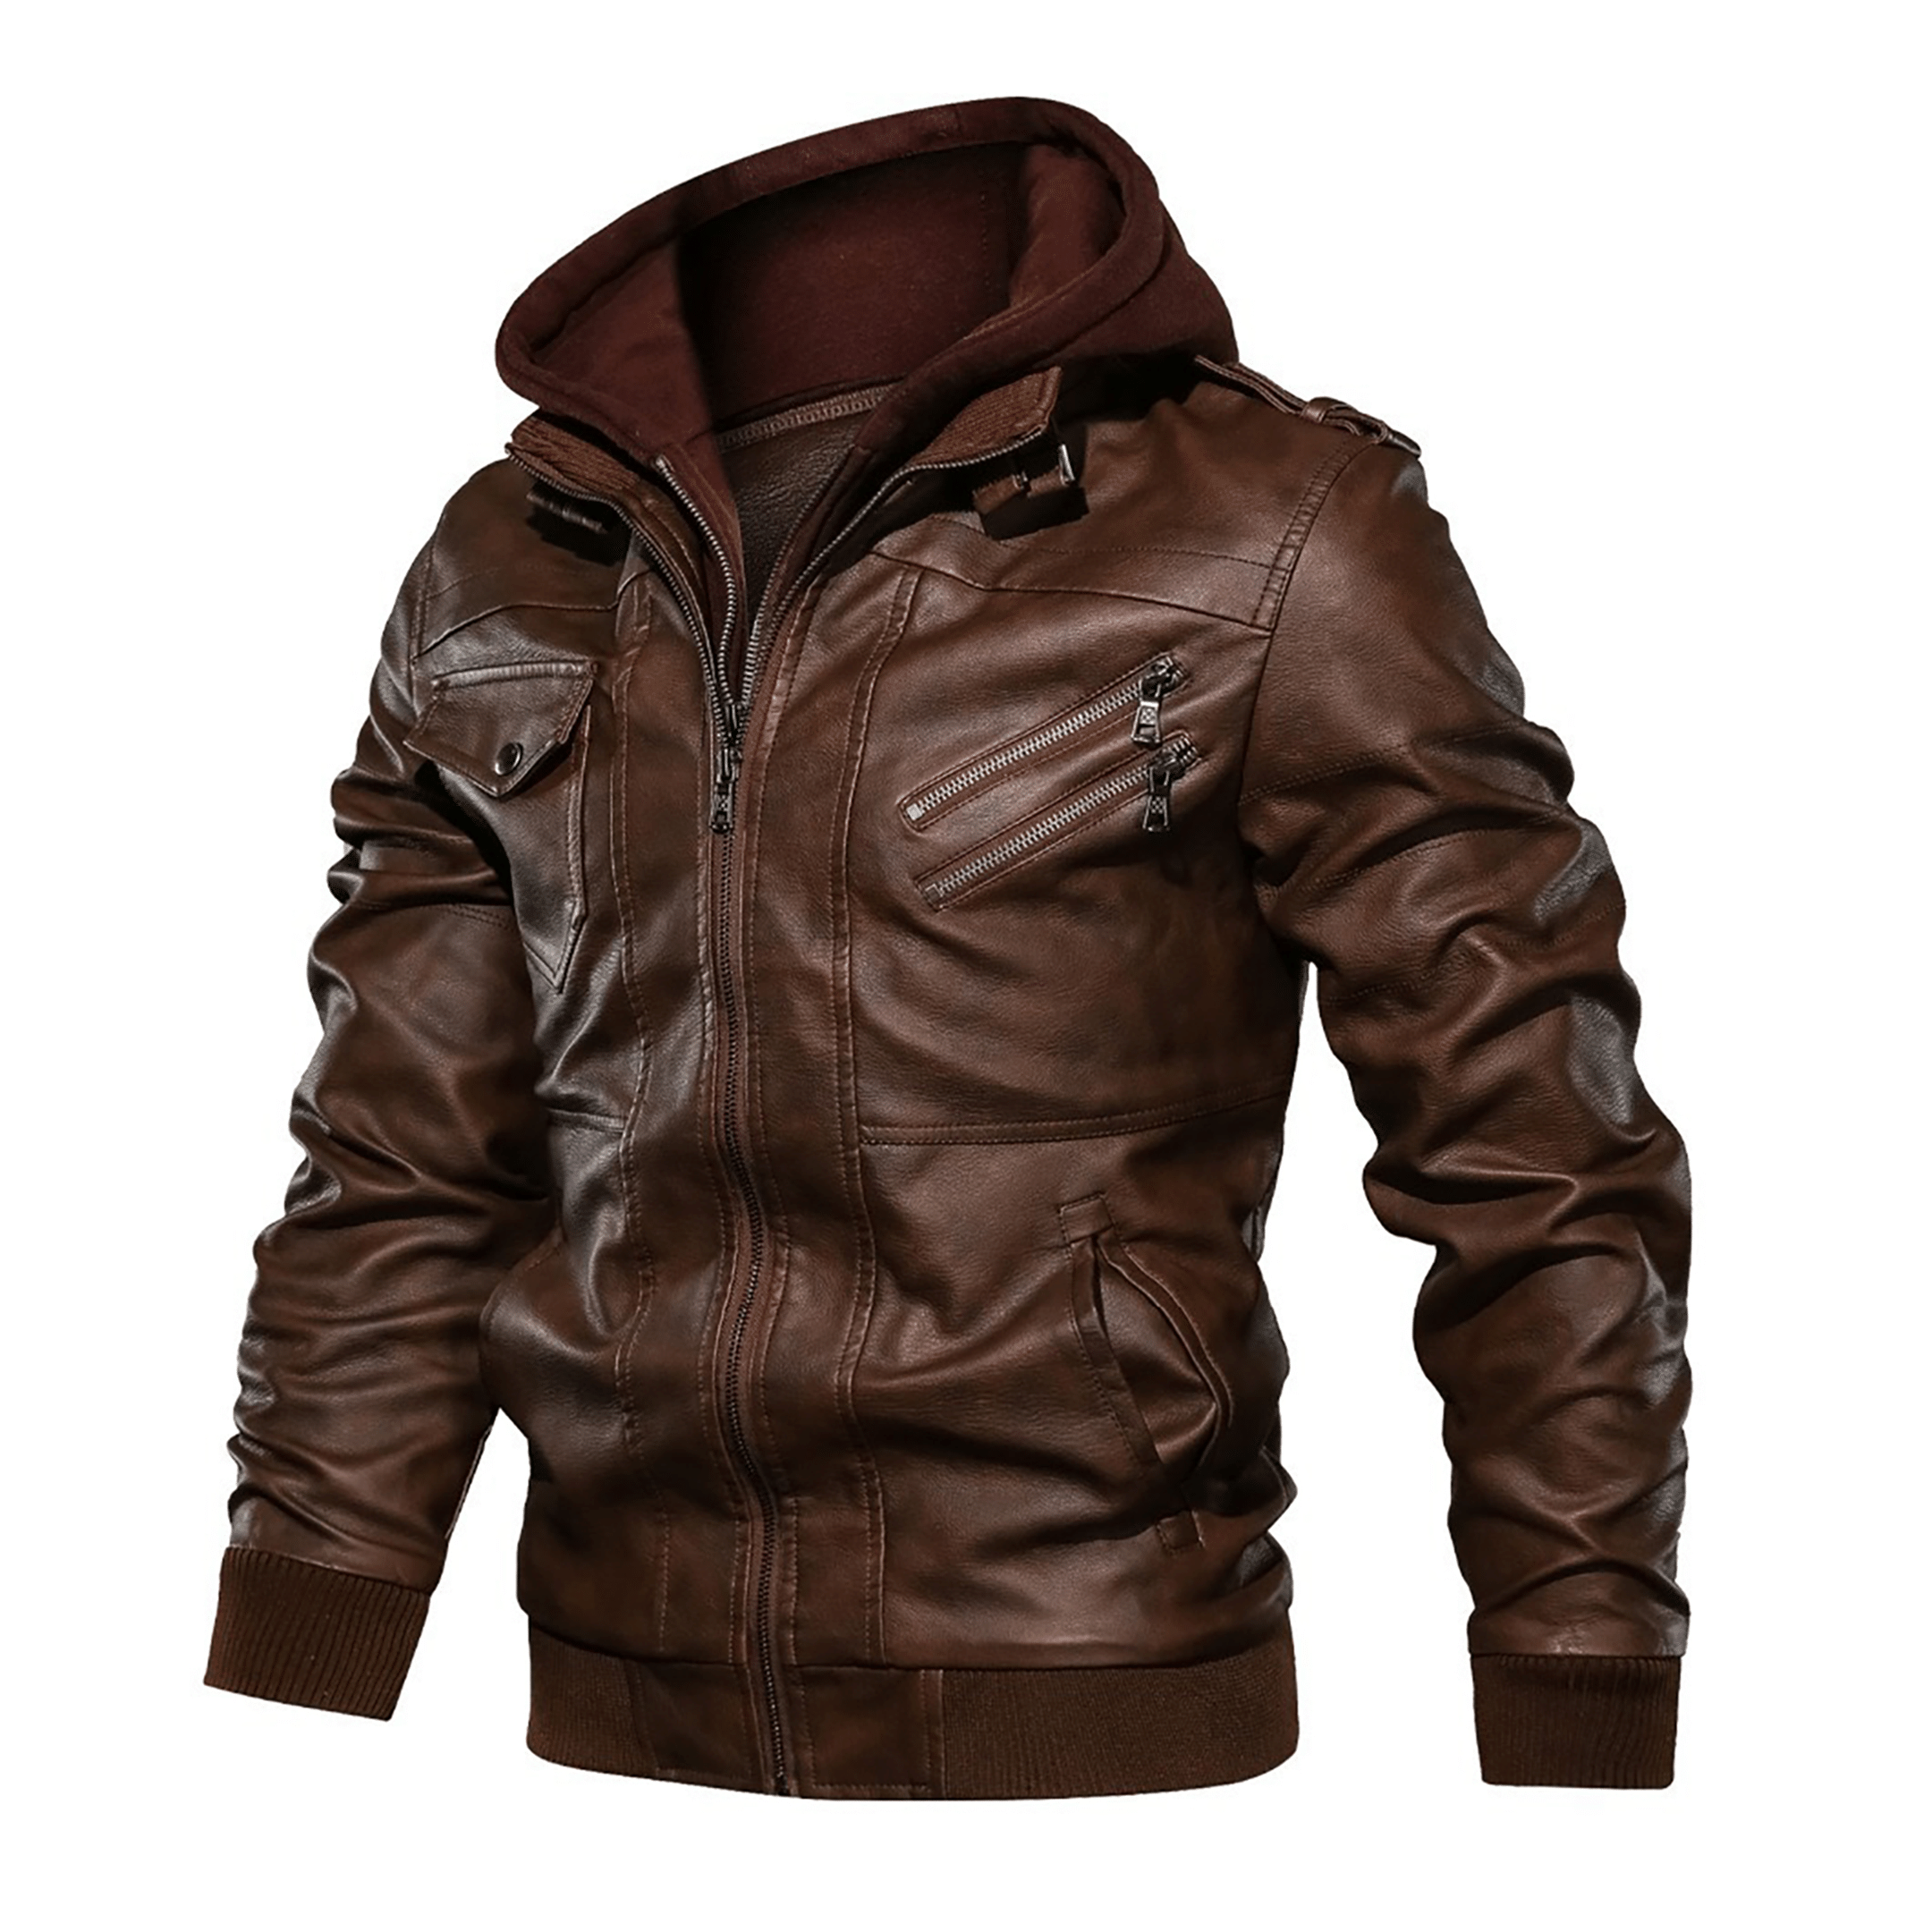 Top leather jackets and latest products 393